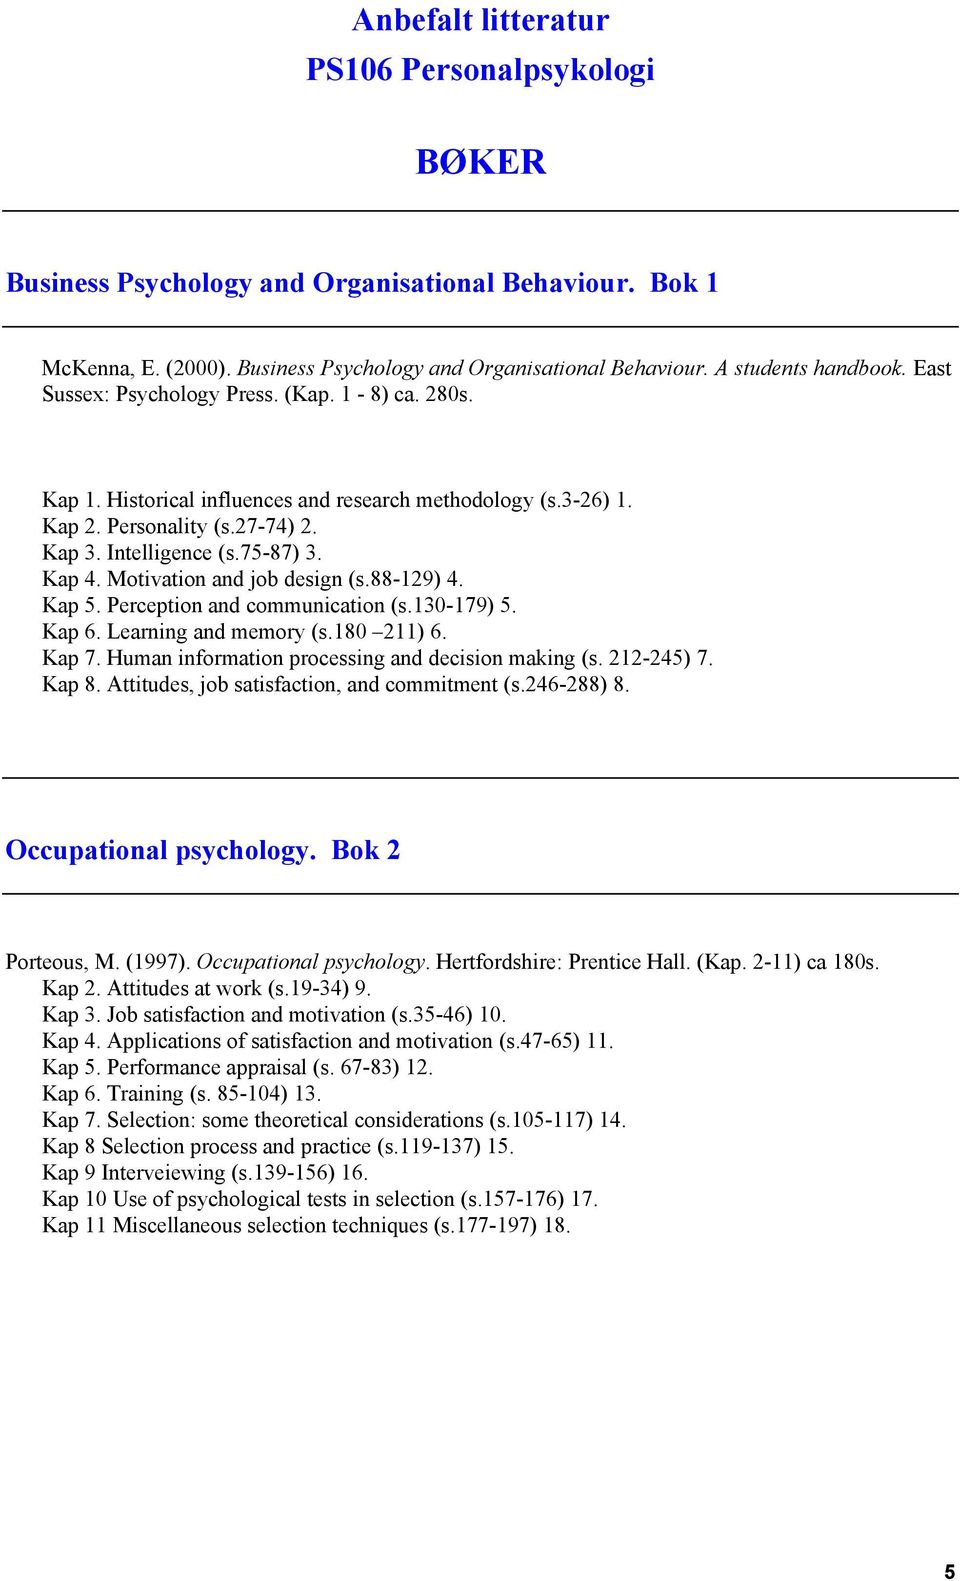 Motivation and job design (s.88-129) 4. Kap 5. Perception and communication (s.130-179) 5. Kap 6. Learning and memory (s.180 211) 6. Kap 7. Human information processing and decision making (s.